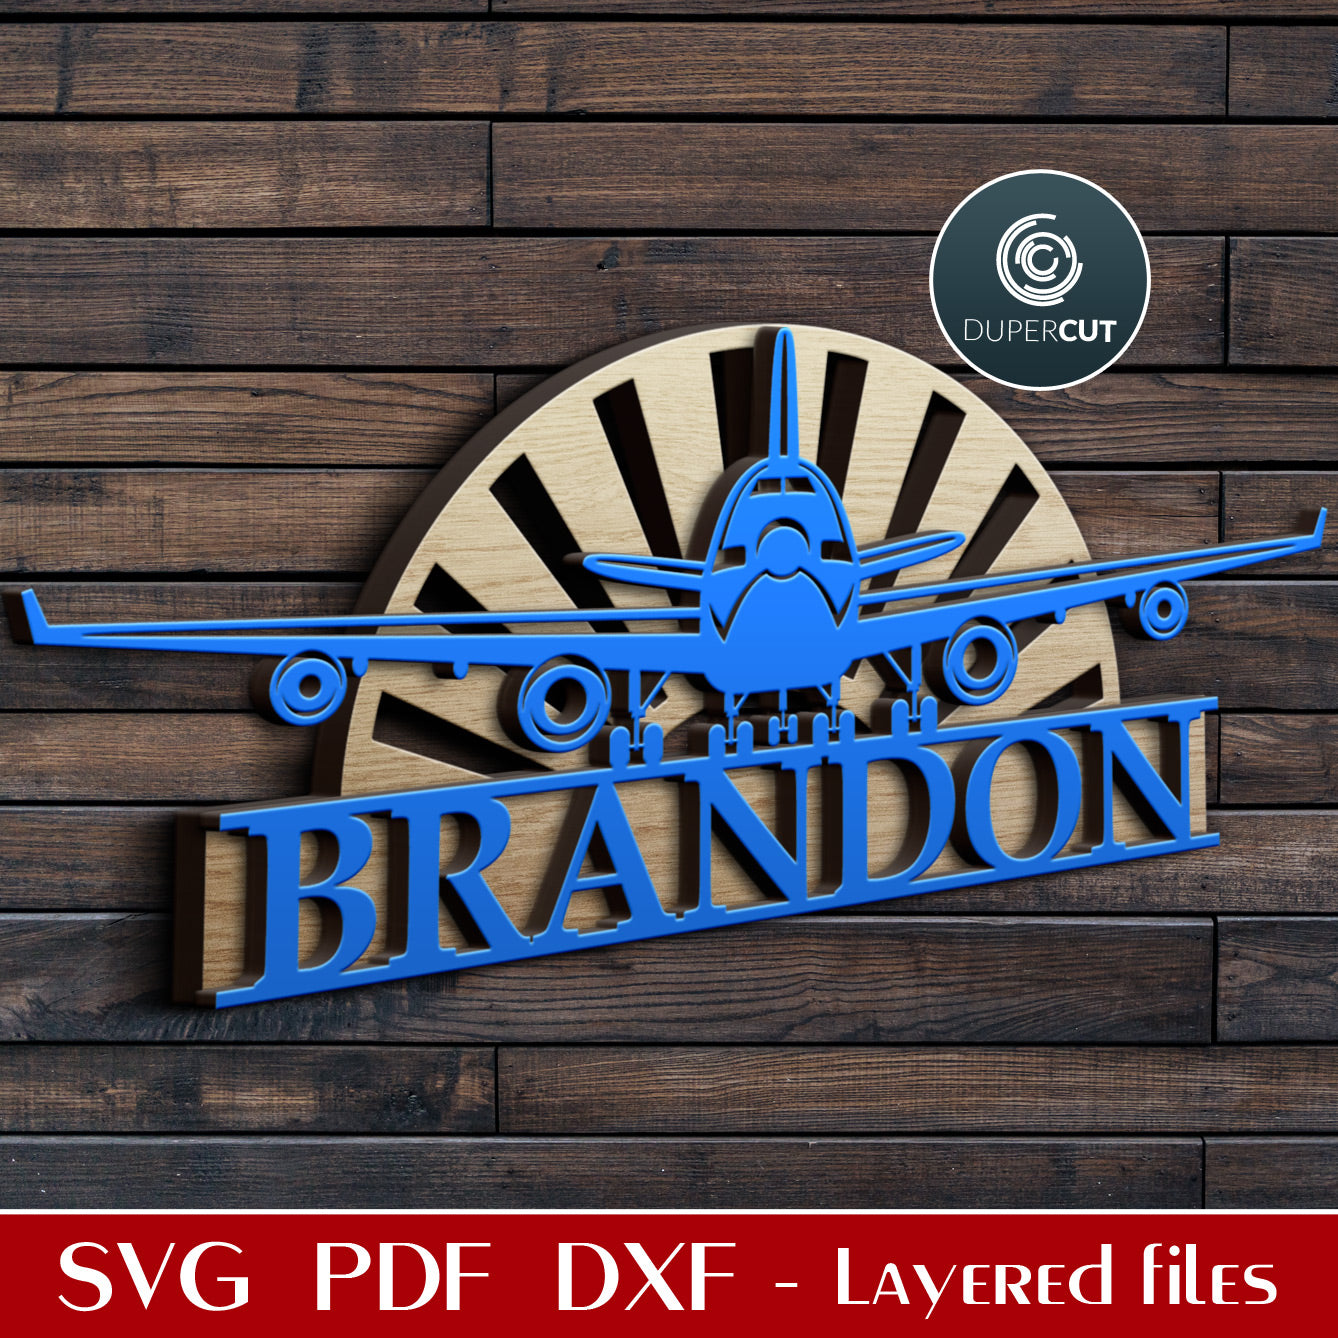 Airplane boys room sign, personalized gift - SVG EPS DXF files for laser cutting with Glowforge, Cricut, Silhouette, CNC plasma machines by DuperCut